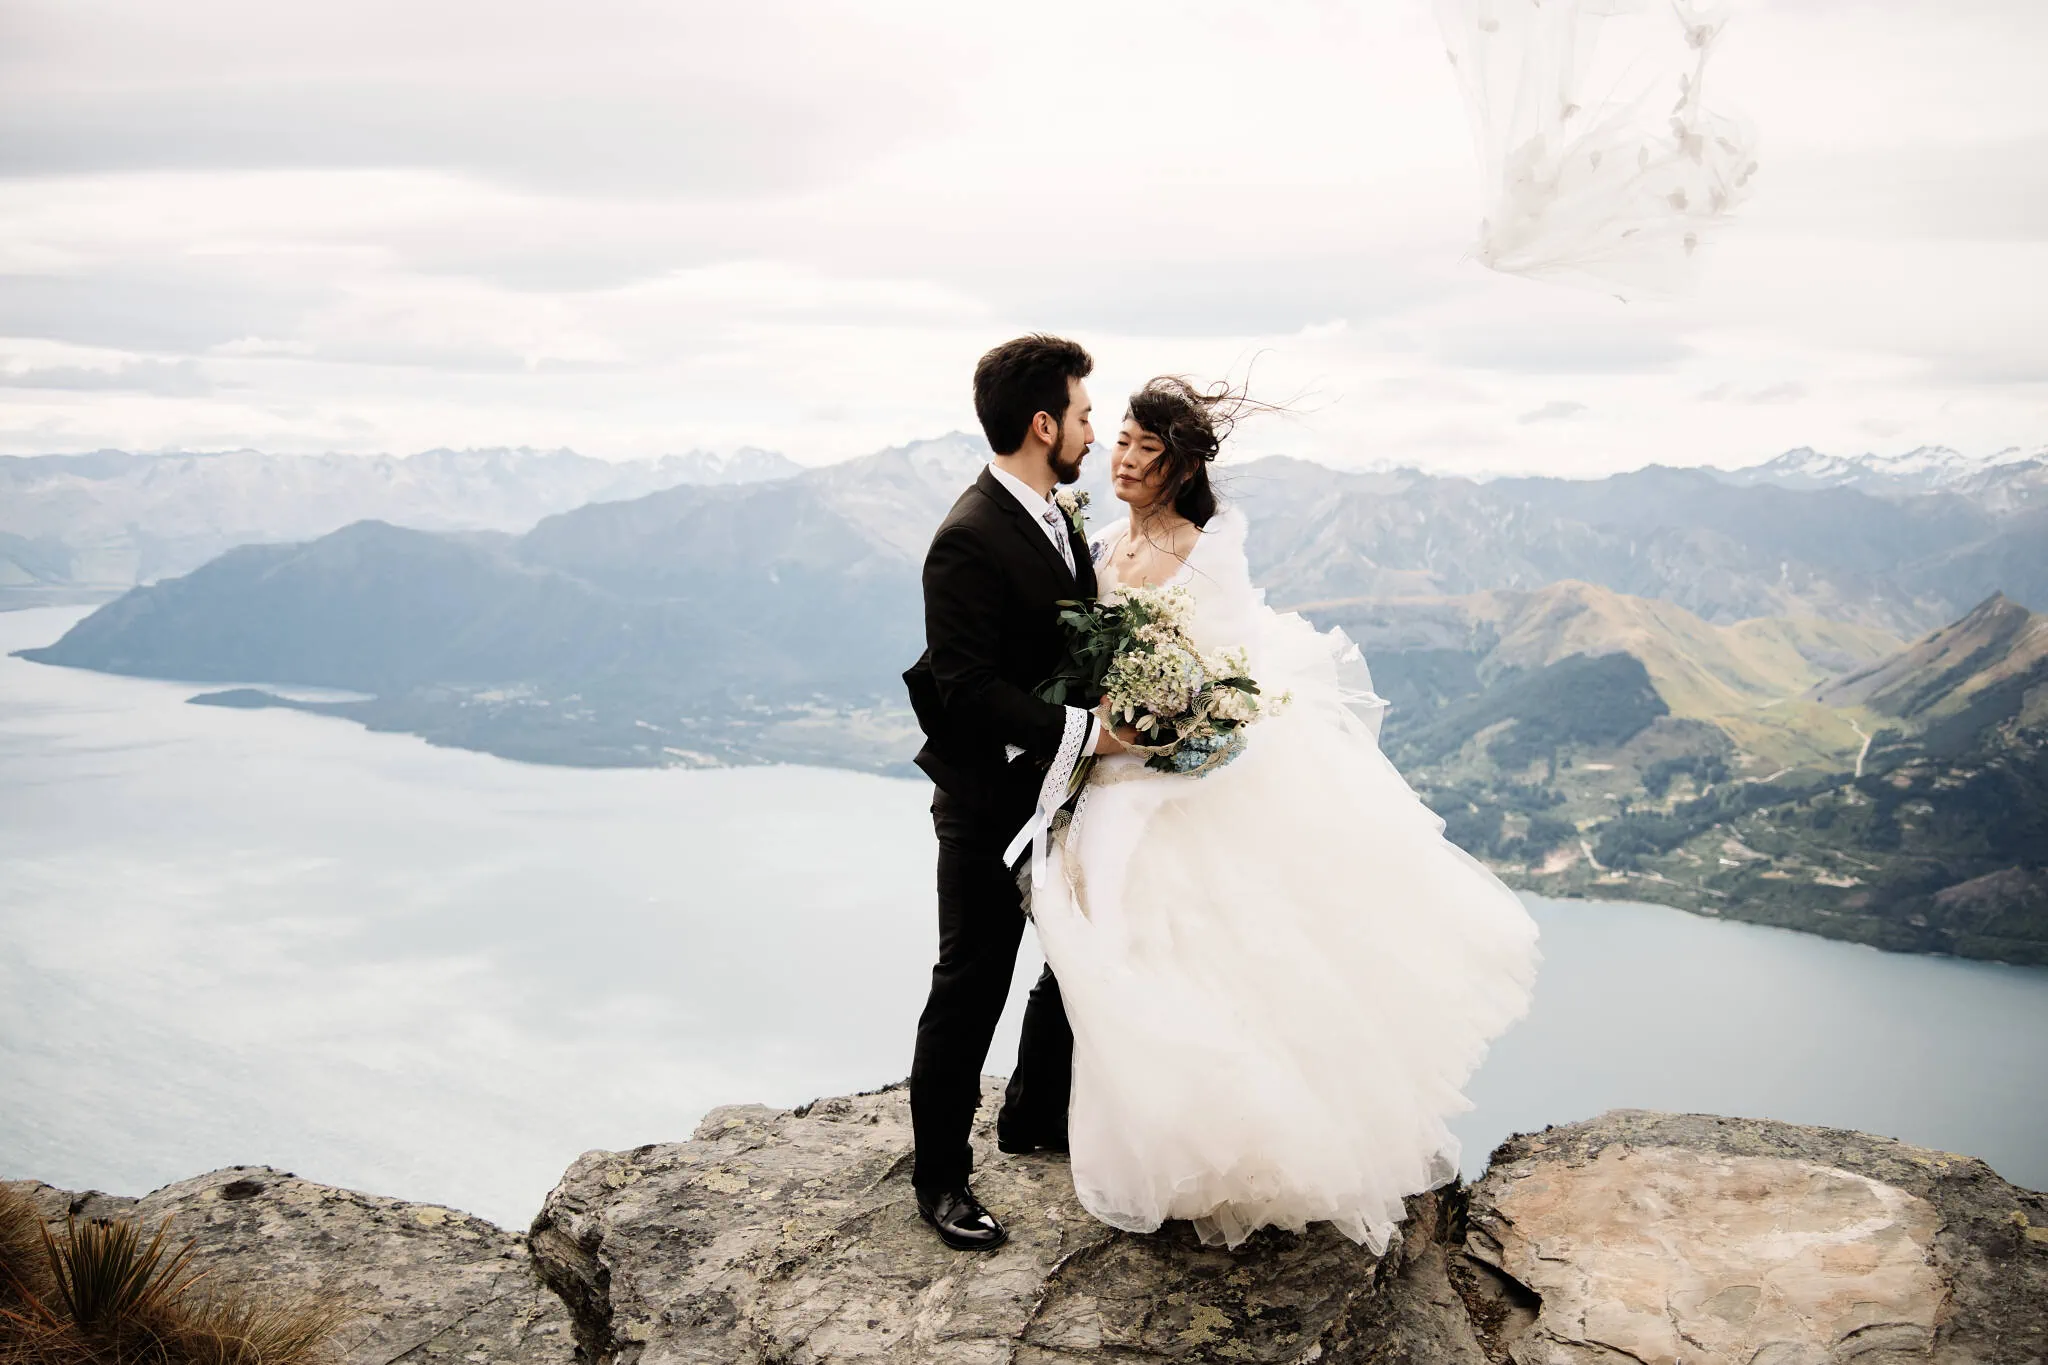 Carlos and Wanzhu's intimate heli elopement wedding on top of Cecil Peak, overlooking Lake Wanaka, with a kiss.